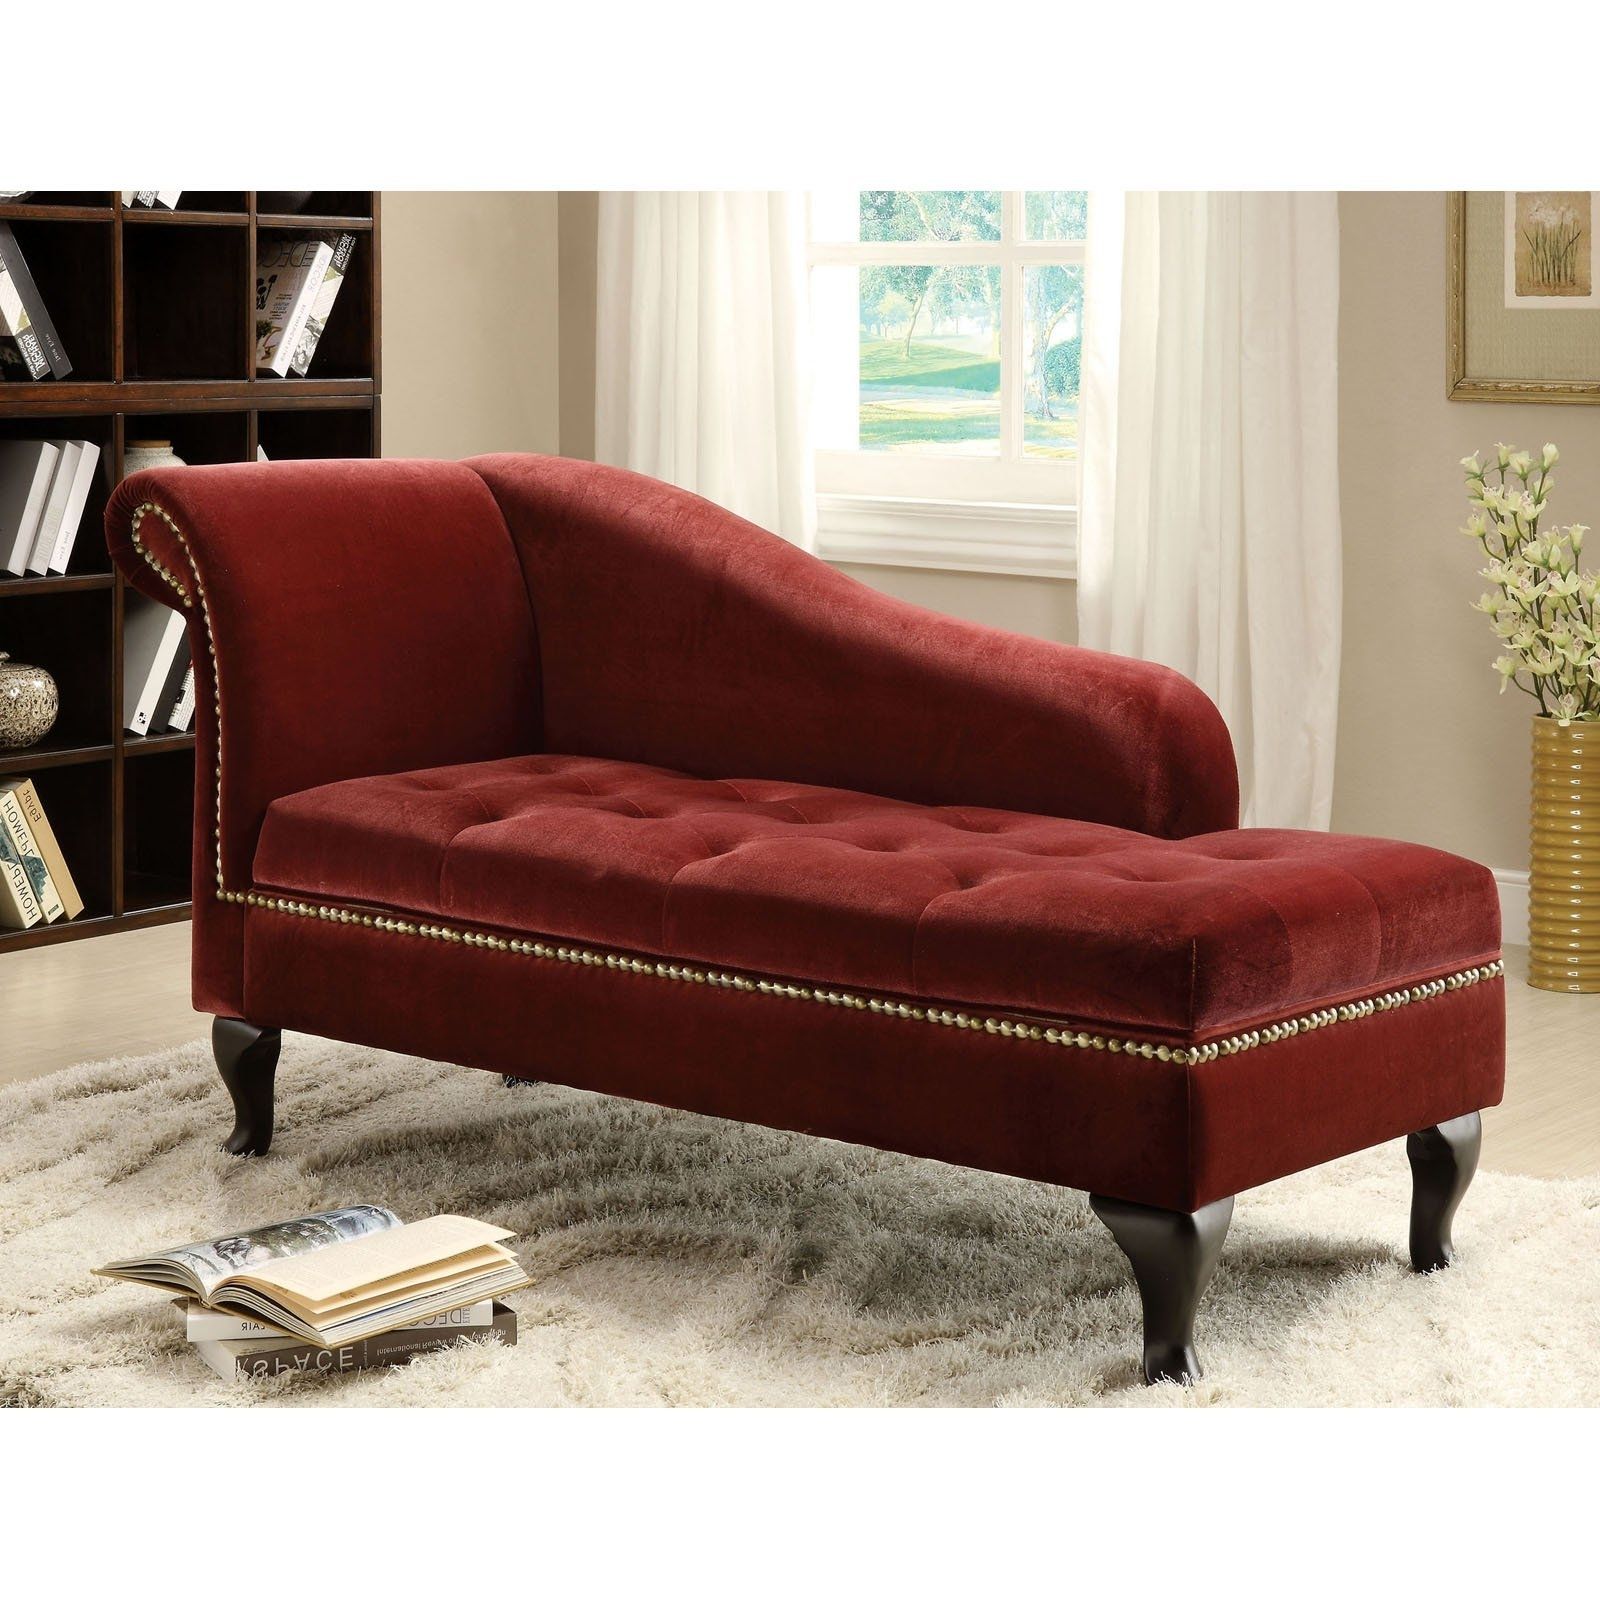 Furniture Of America Visage Fabric Storage Chaise – Colonial Red Throughout Most Recently Released Fabric Chaise Lounge Chairs (View 10 of 15)